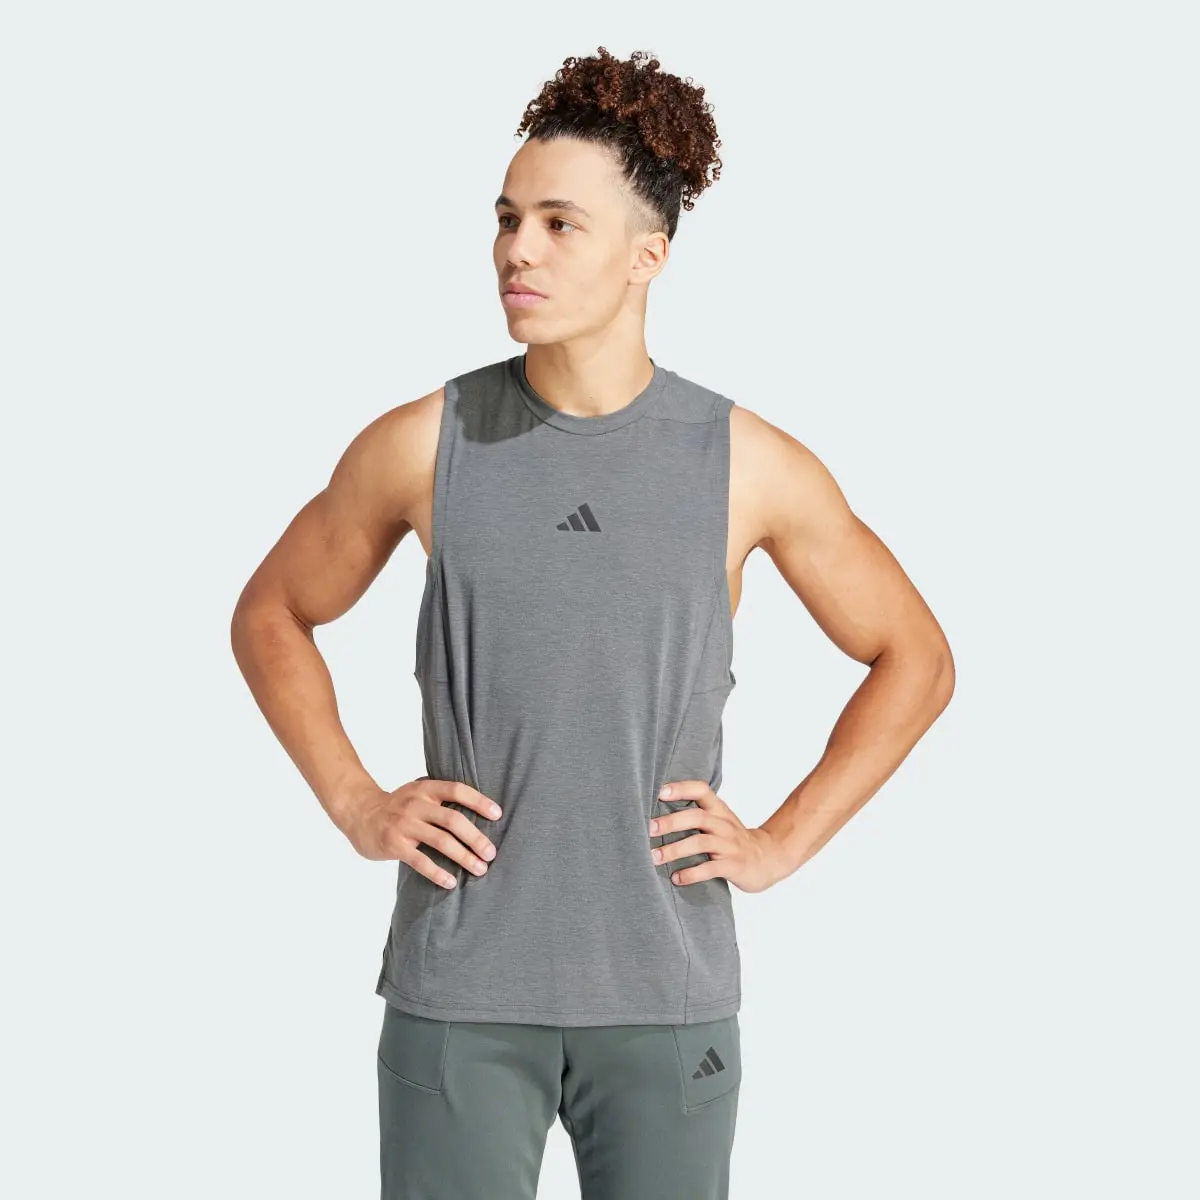 Adidas Designed for Training Workout Tanktop. 2